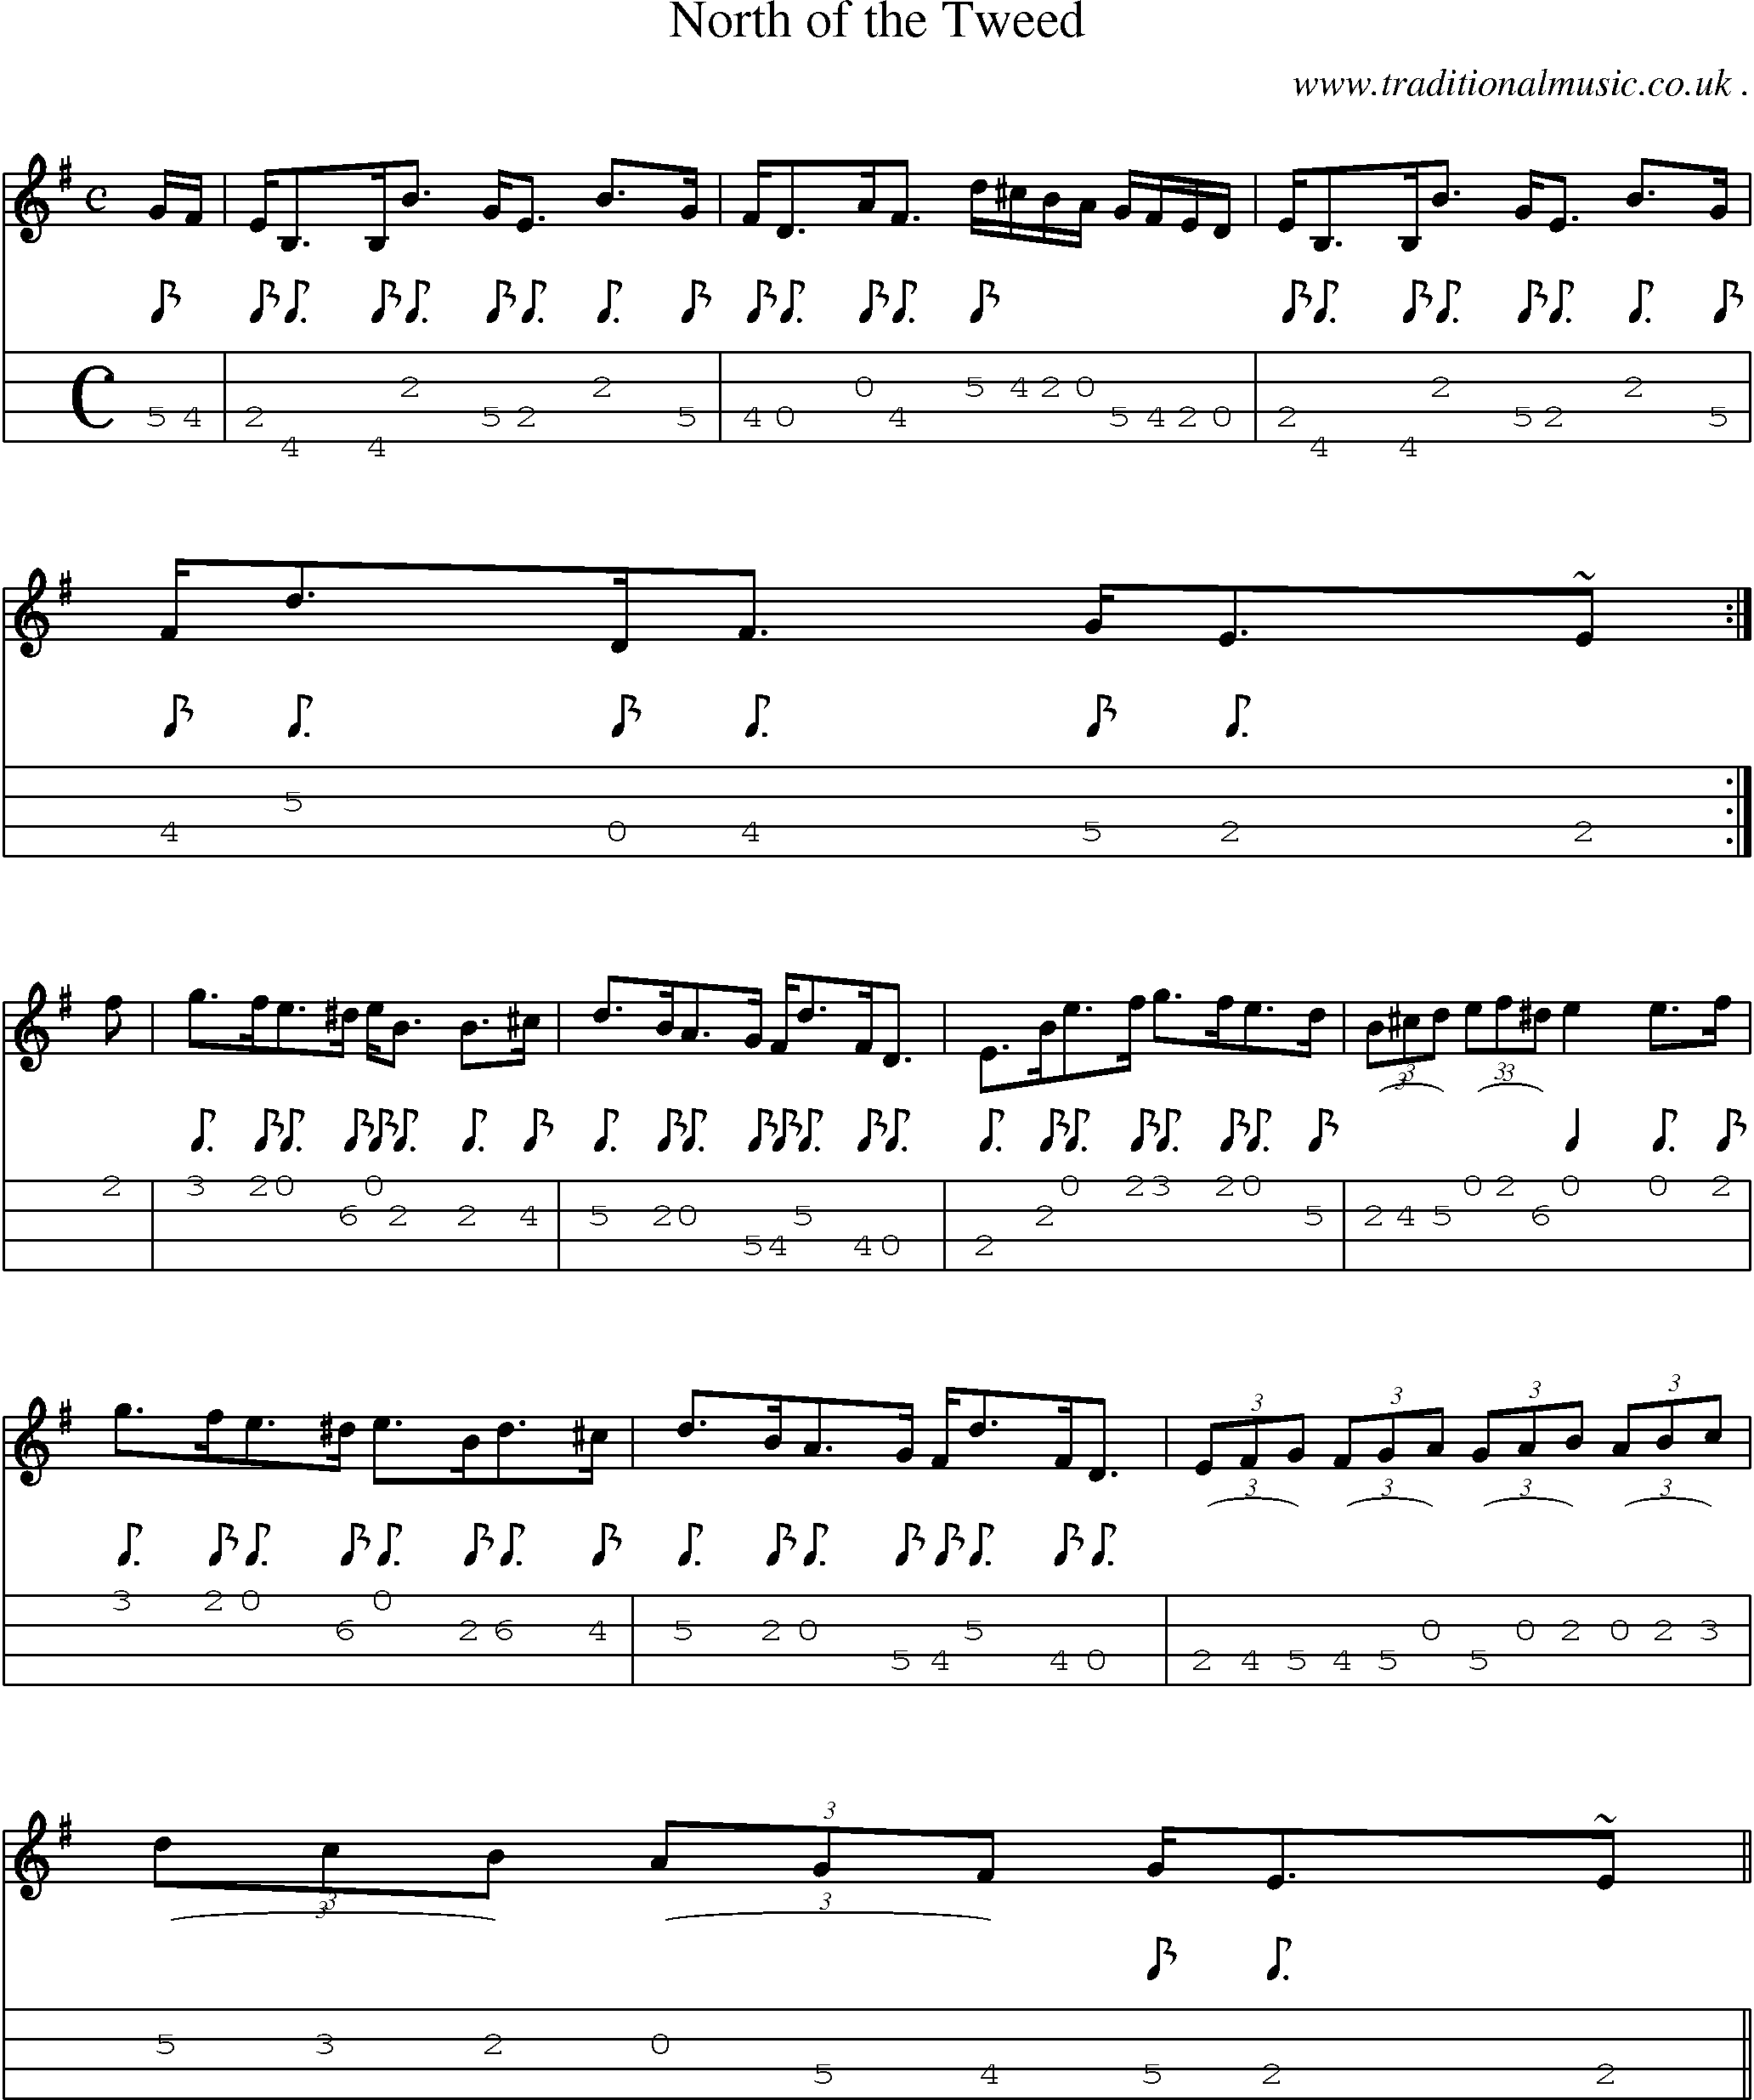 Sheet-music  score, Chords and Mandolin Tabs for North Of The Tweed